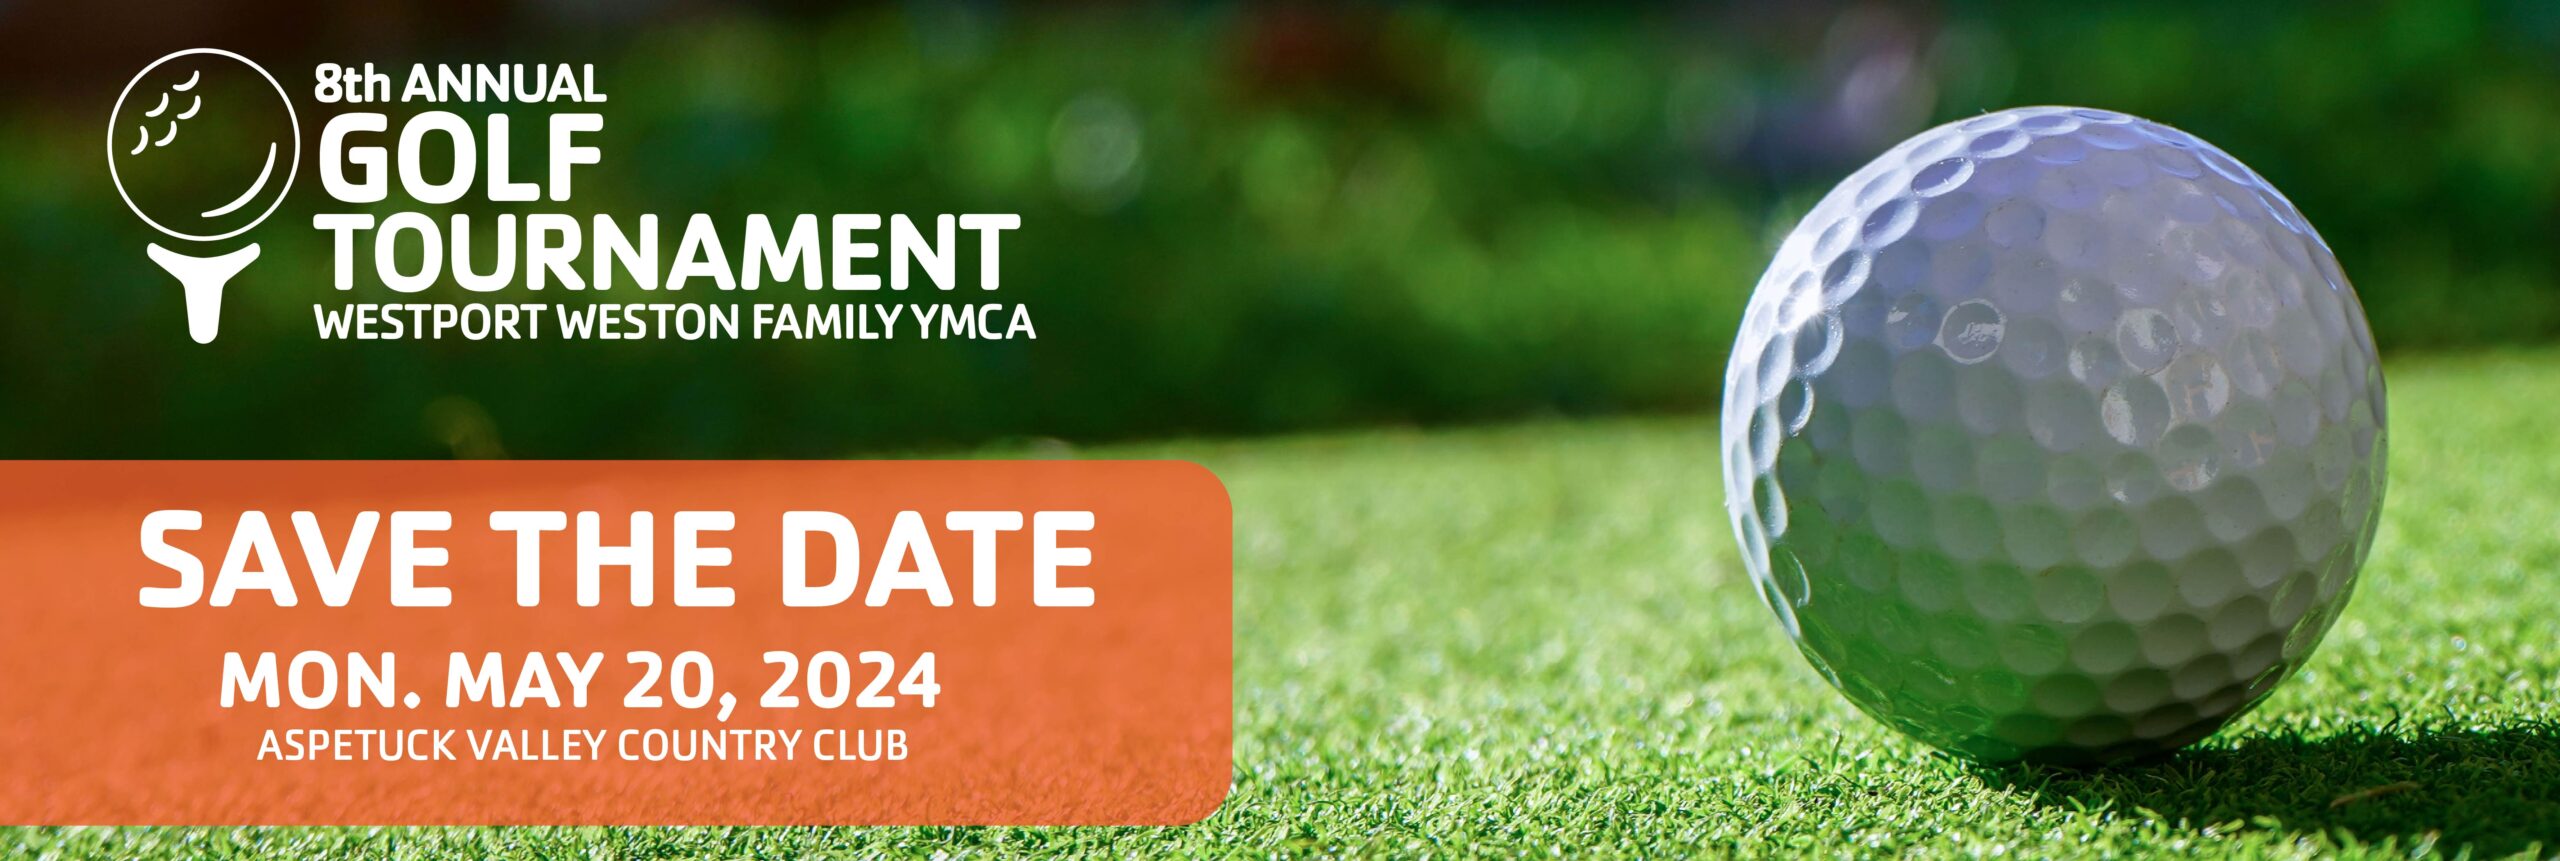 8th Annual Golf Tournament at the Westport Weston Family YMCA